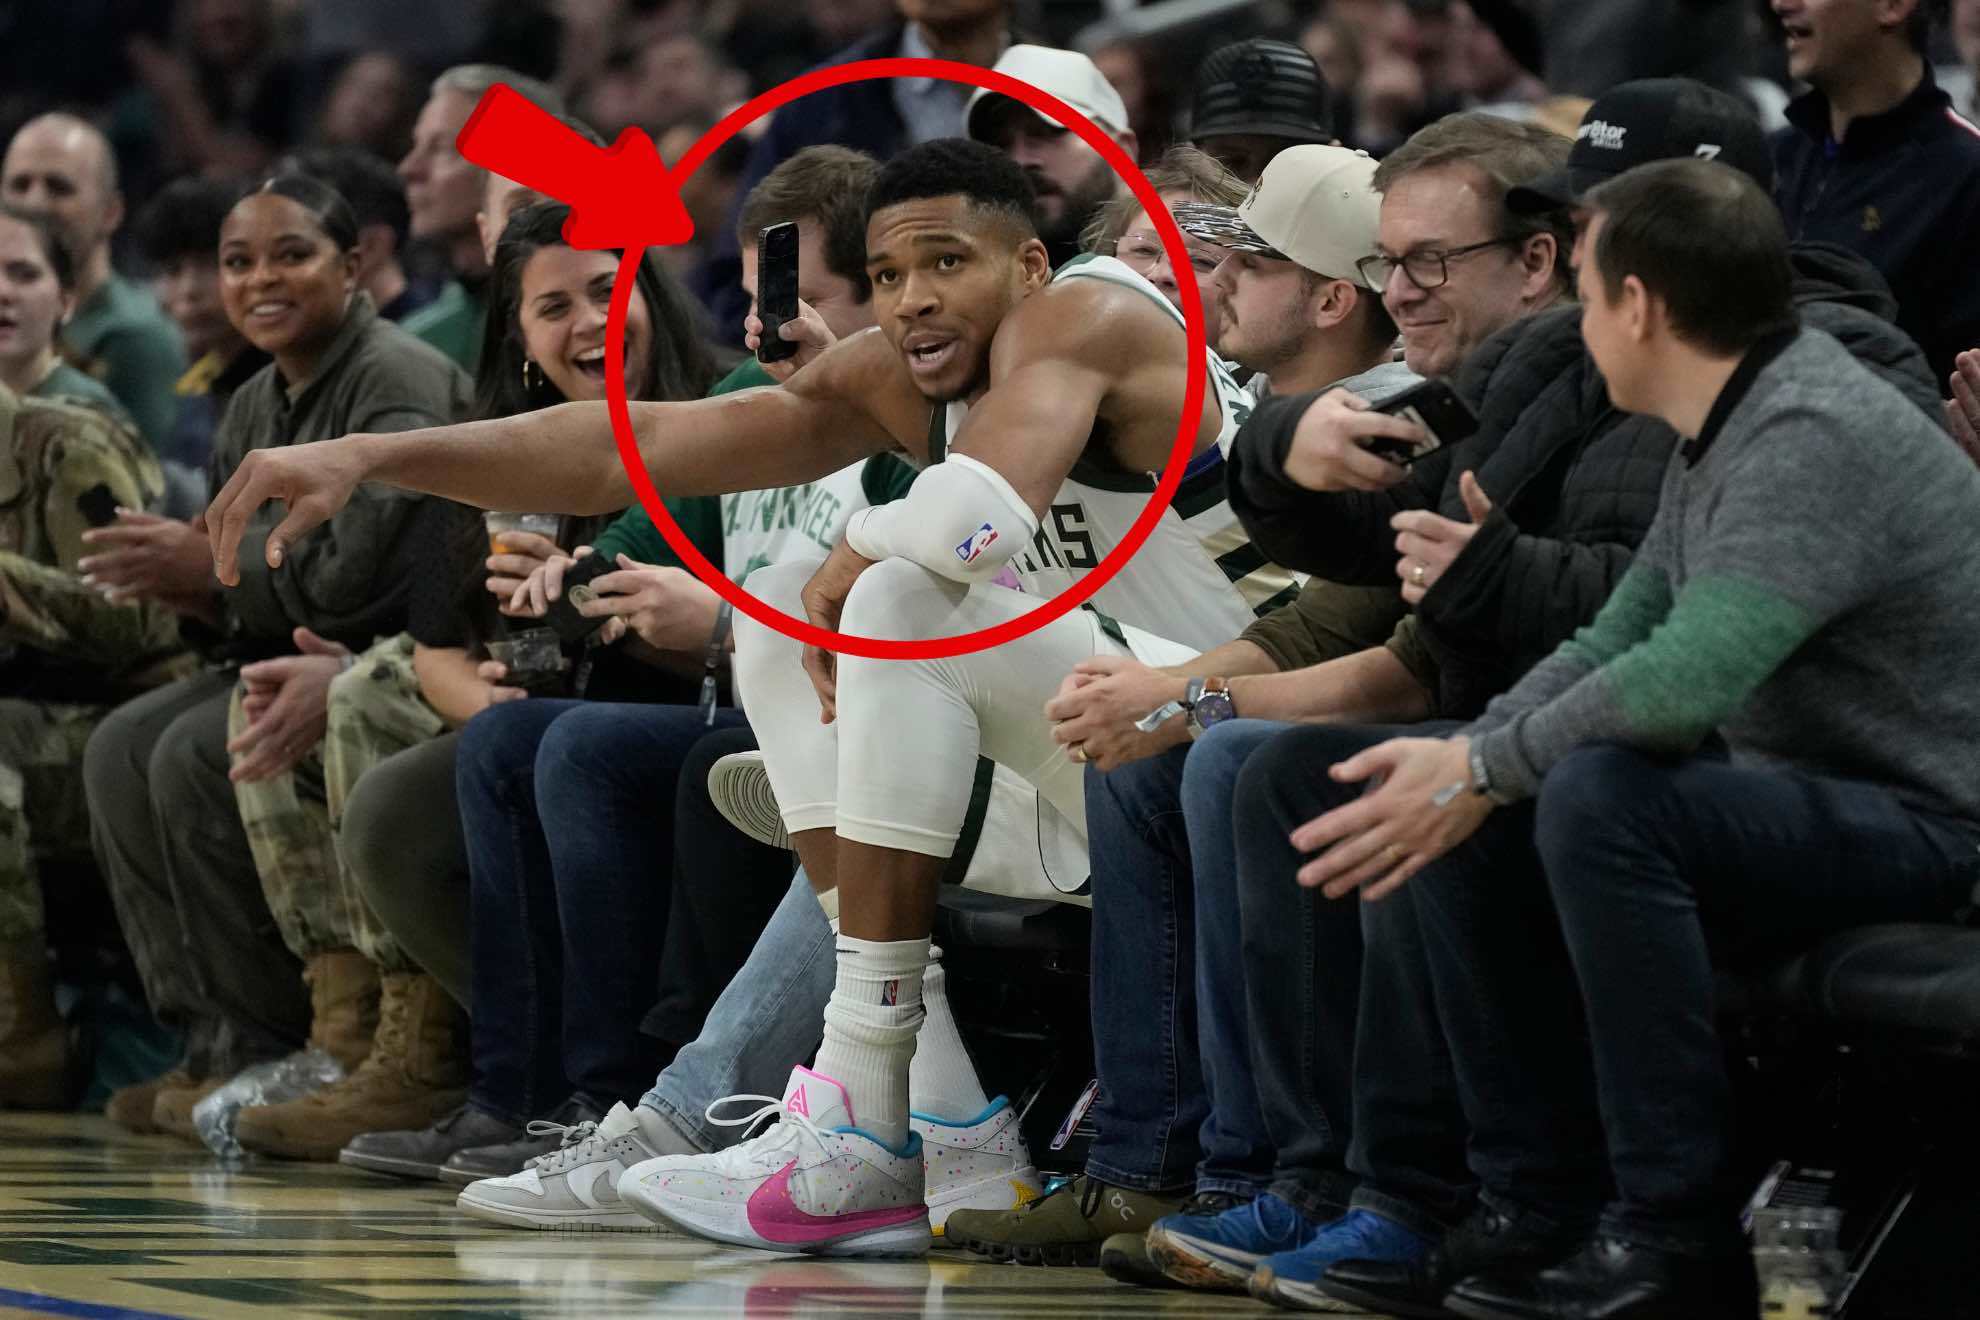 Giannis Antetokounmpo's controversial ejection leads to the most epic courtside fan video of all time